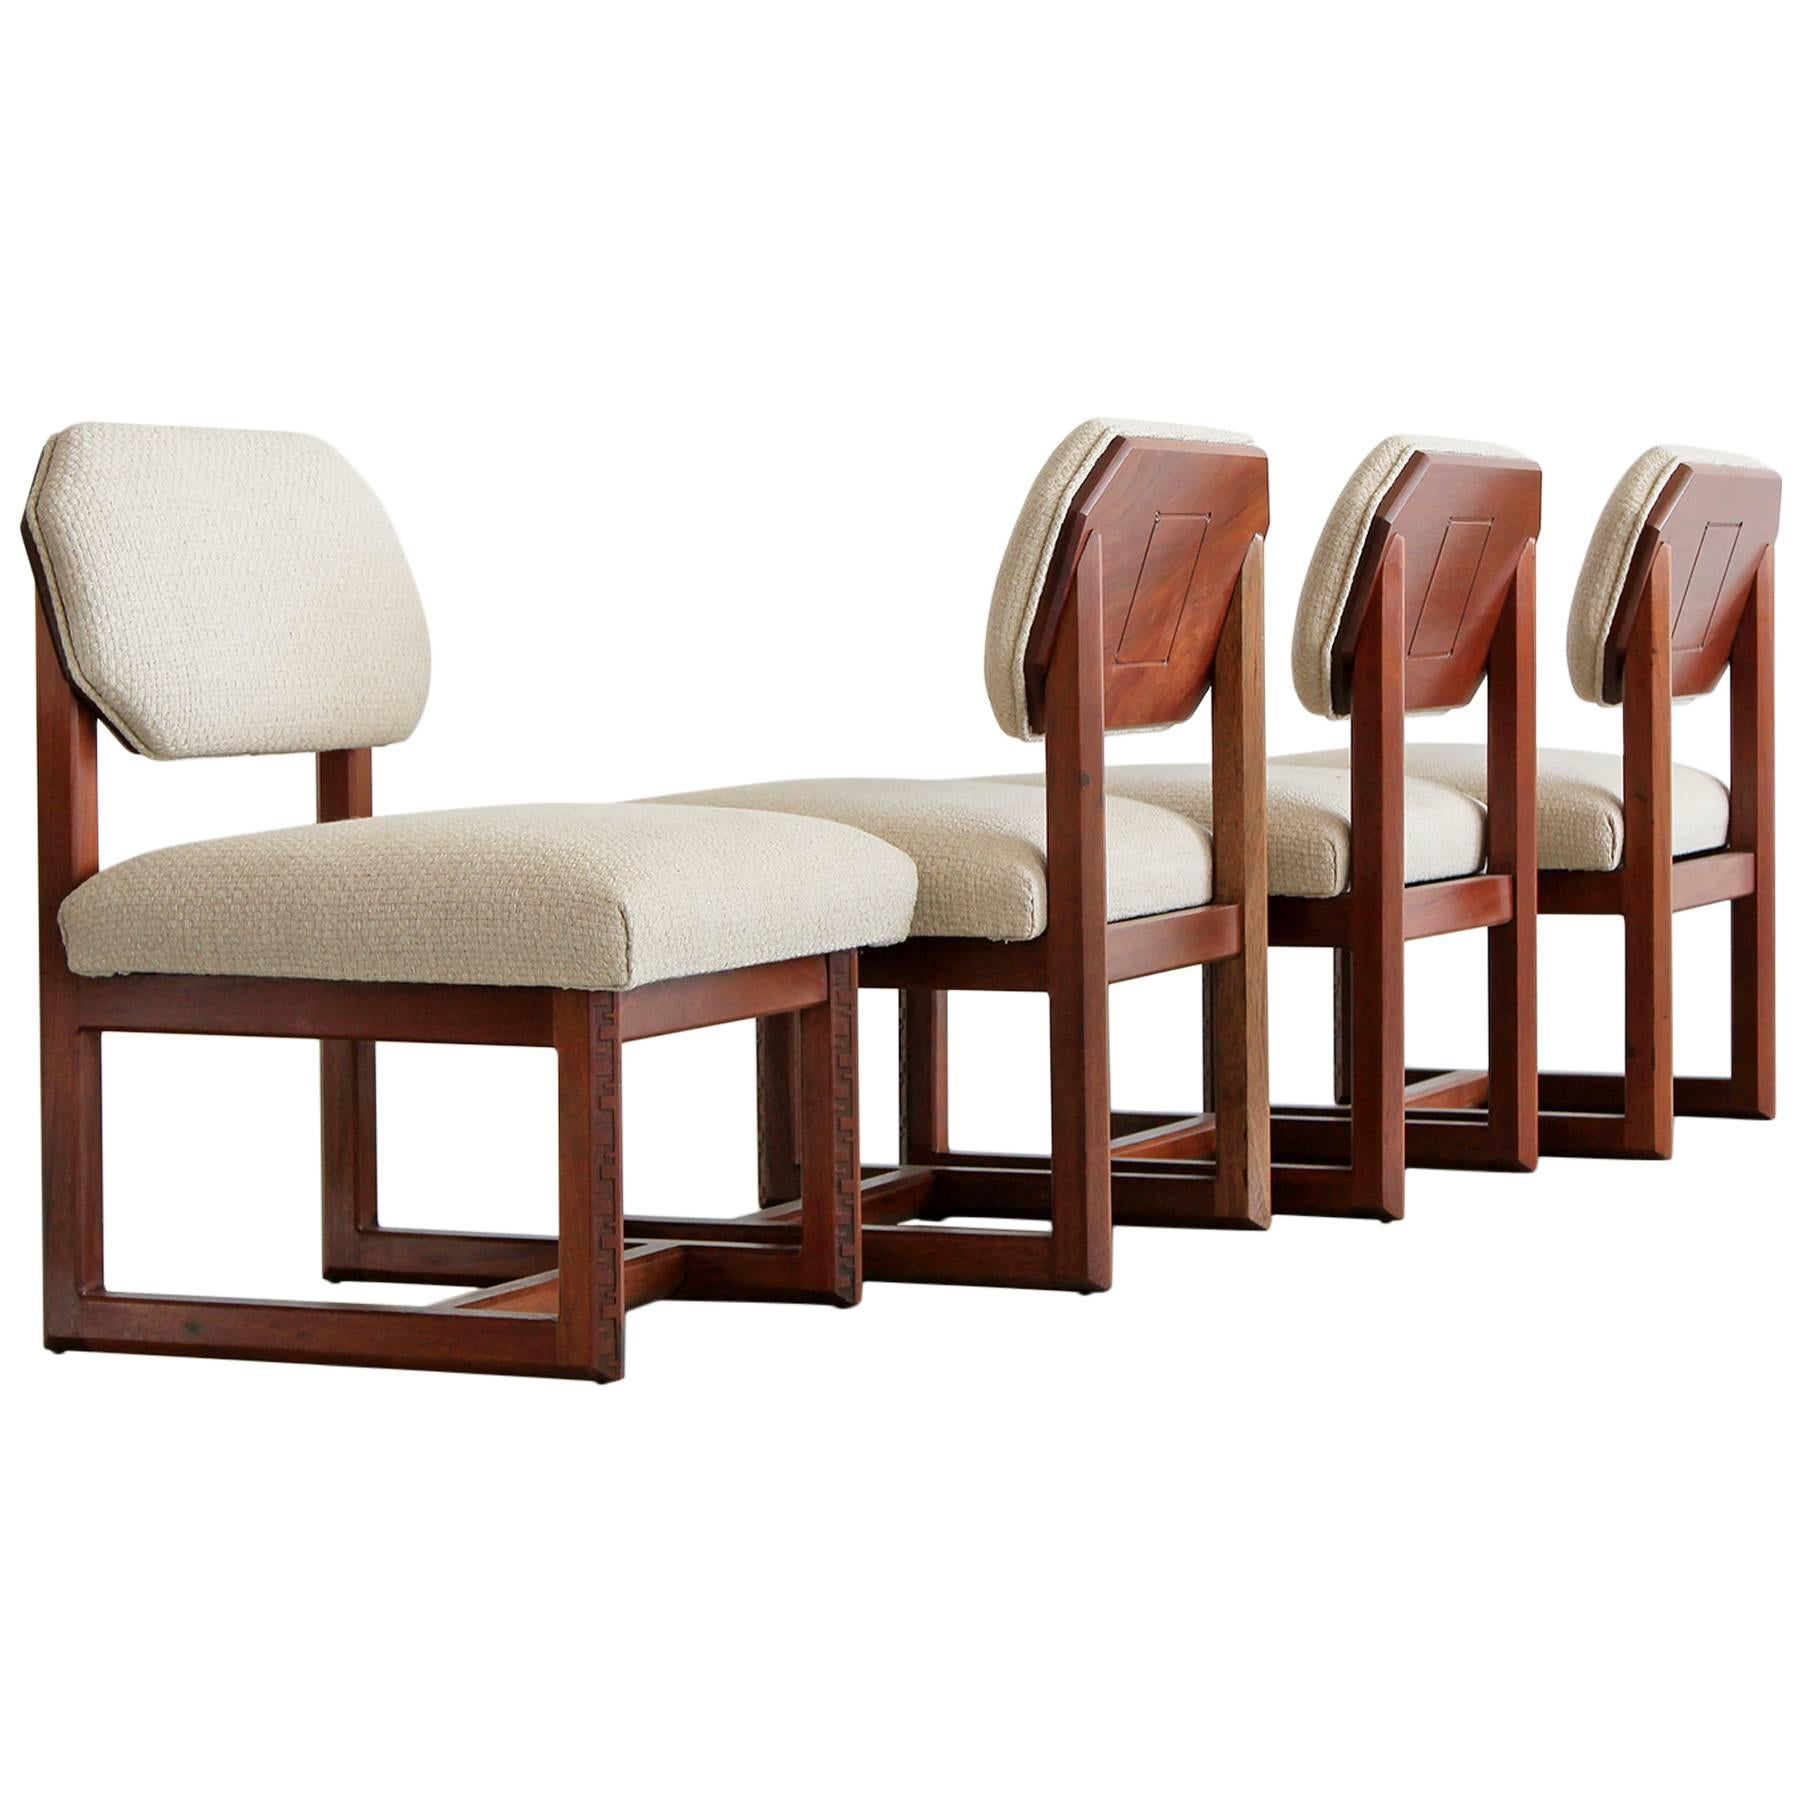 Low profile game table set with 4 matching chairs by Frank Lloyd Wright for Heritage Henredon. Signature carved Taliesin frames with floating octagon shaped back each with carved wood. Wonderful grain to wood and incredible craftsmanship.  Newly